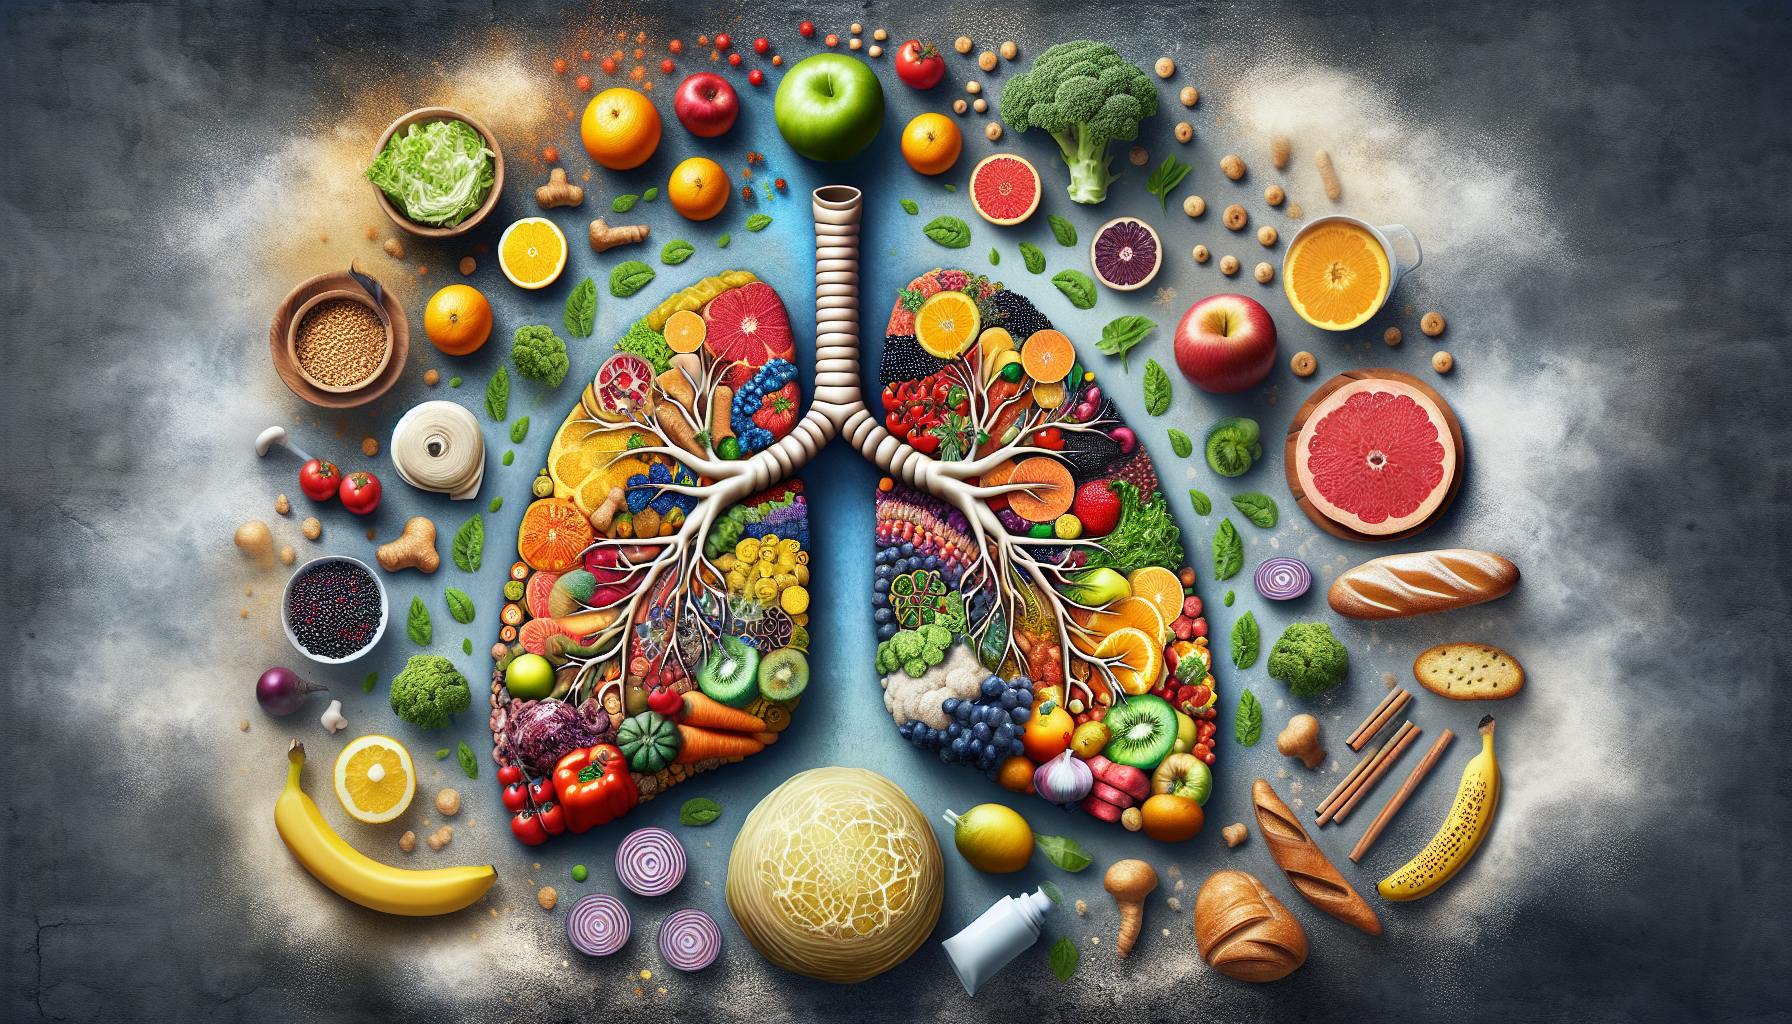 How Does Diet Impact Respiratory Health?